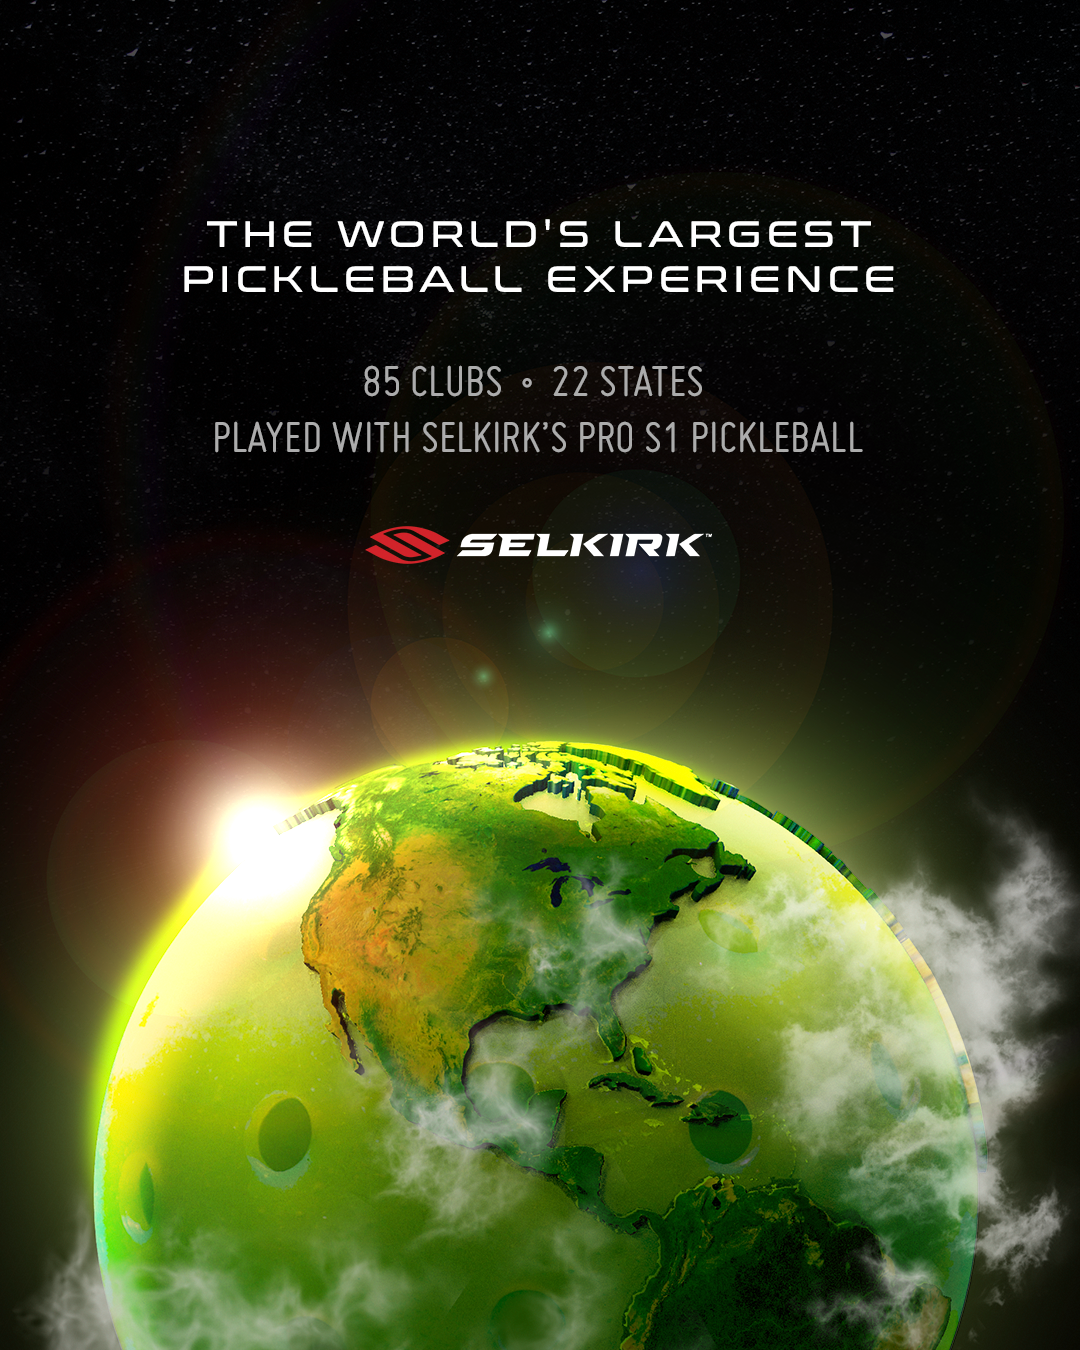 Selkirk's Pro S1 pickleball takes center stage at Invited's 'World's Largest Pickleball Experience'